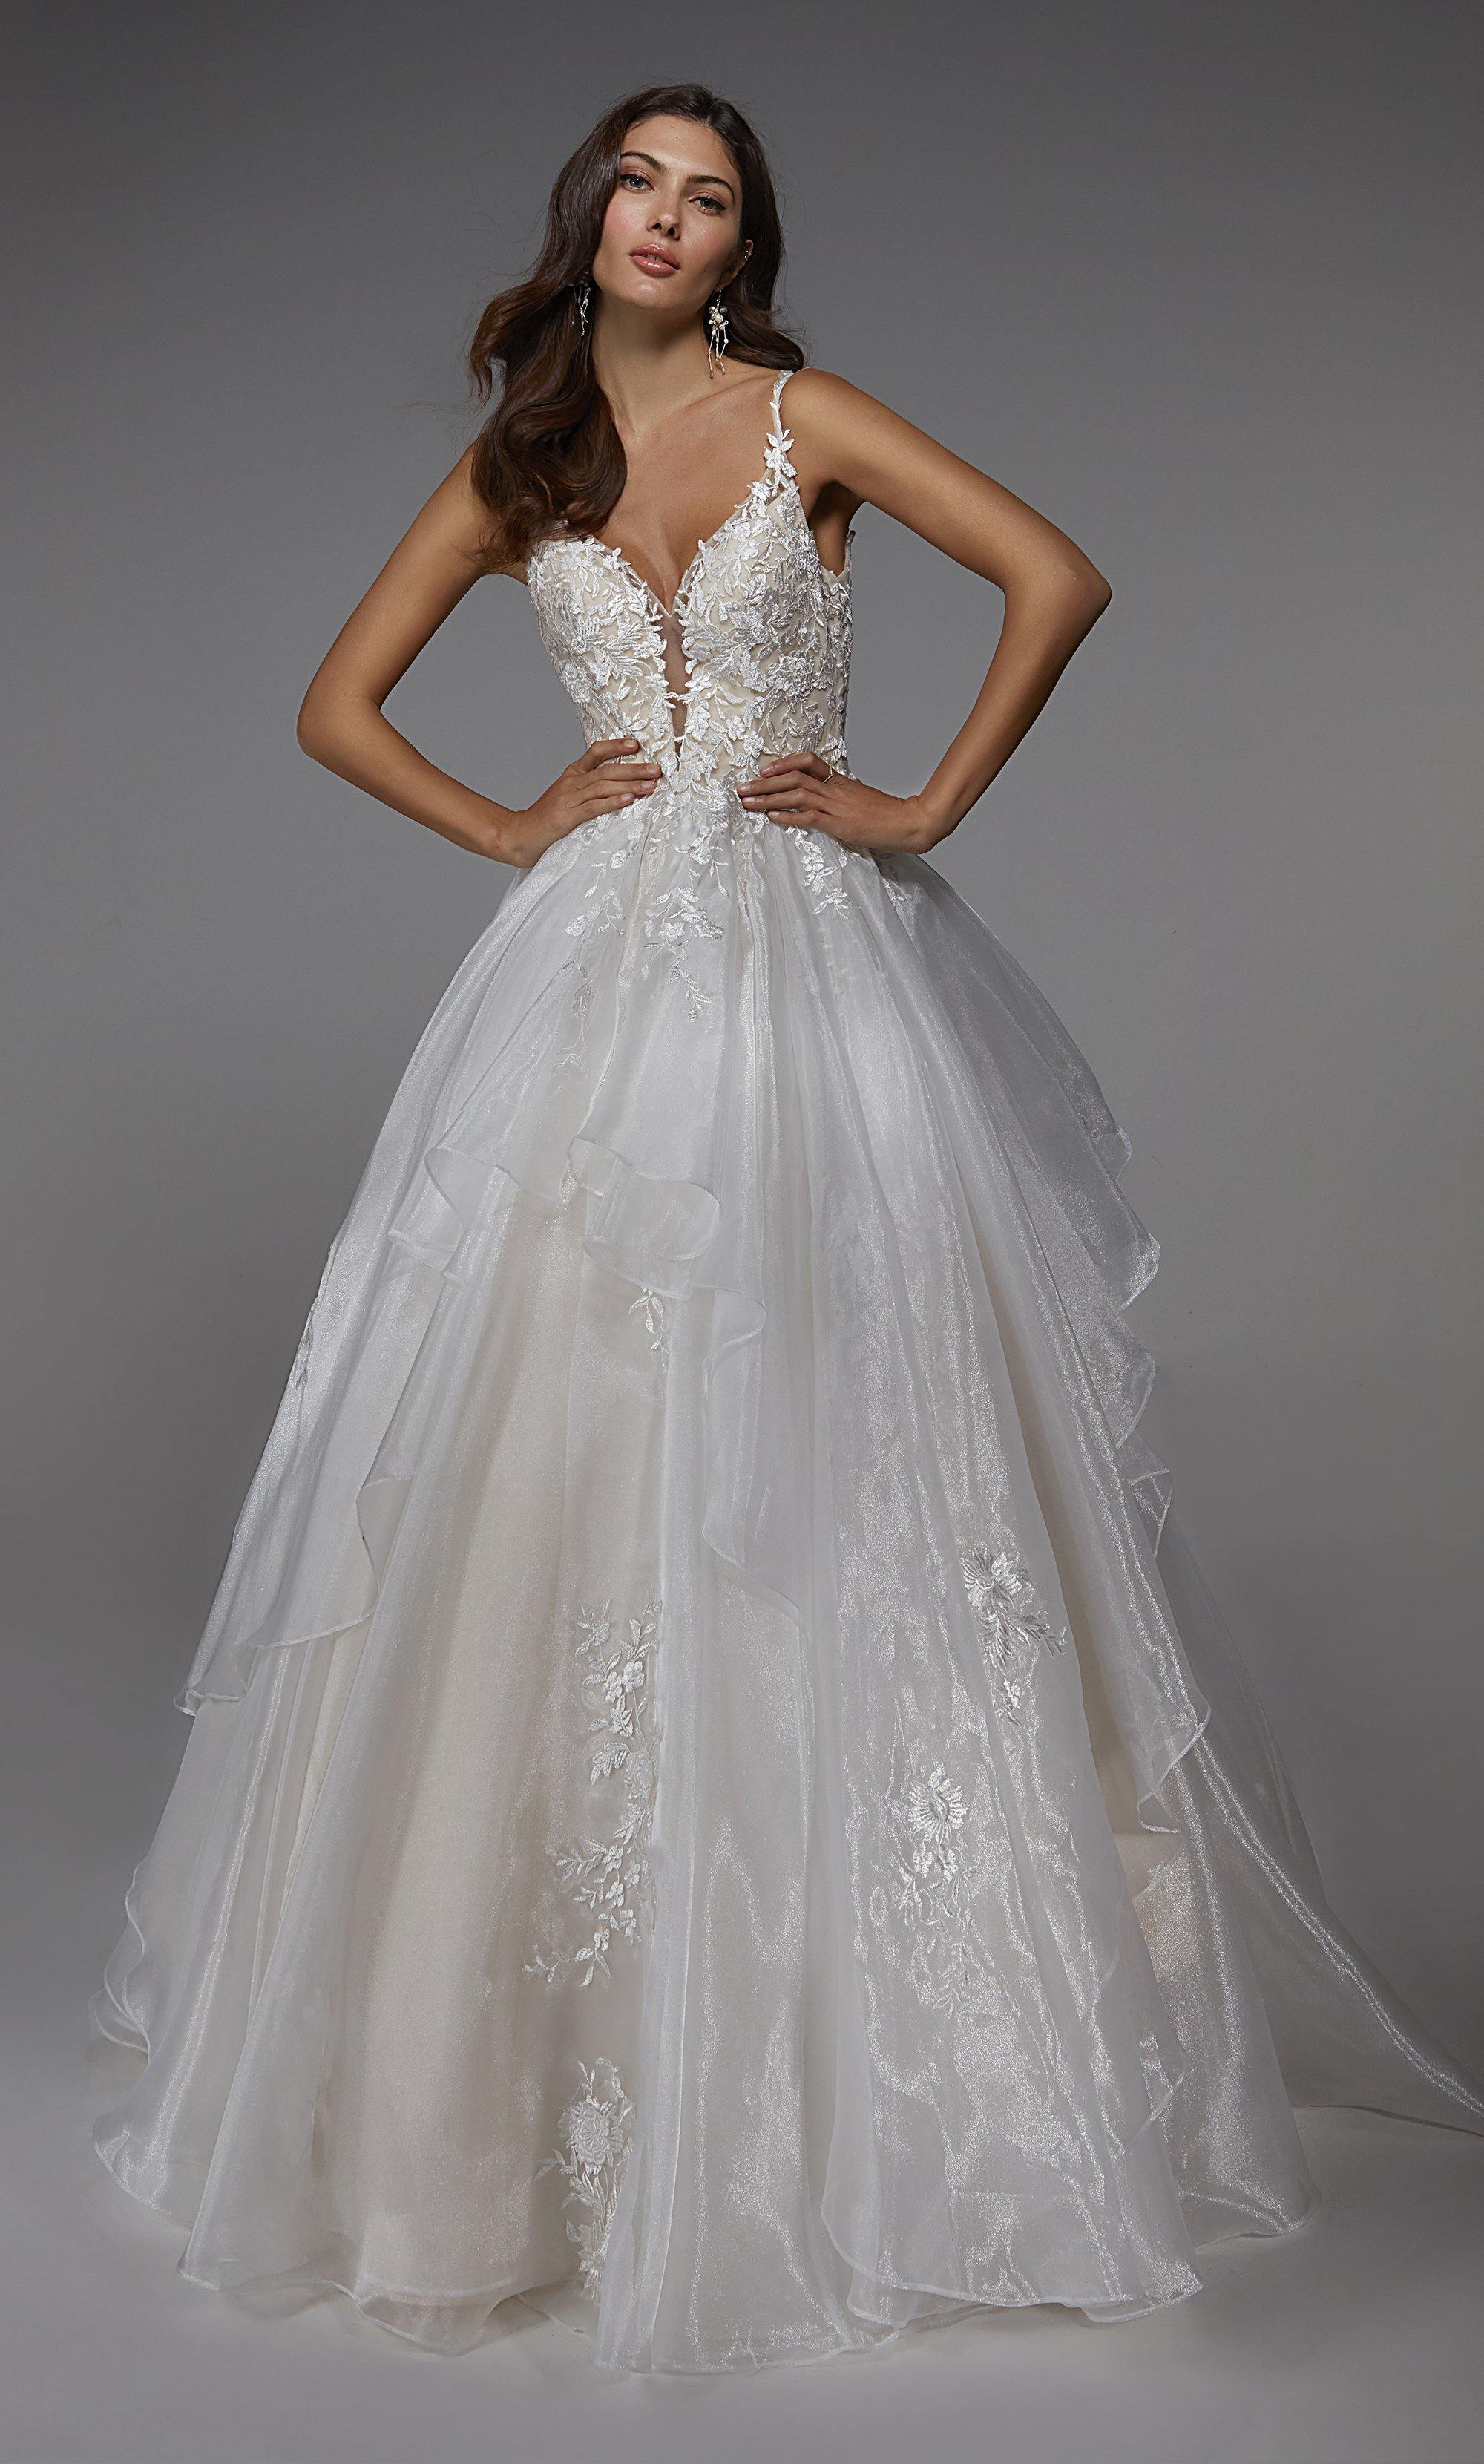 Formal Dress: 7047. Long Bridal Gown, Plunging Neckline, Ball Gown